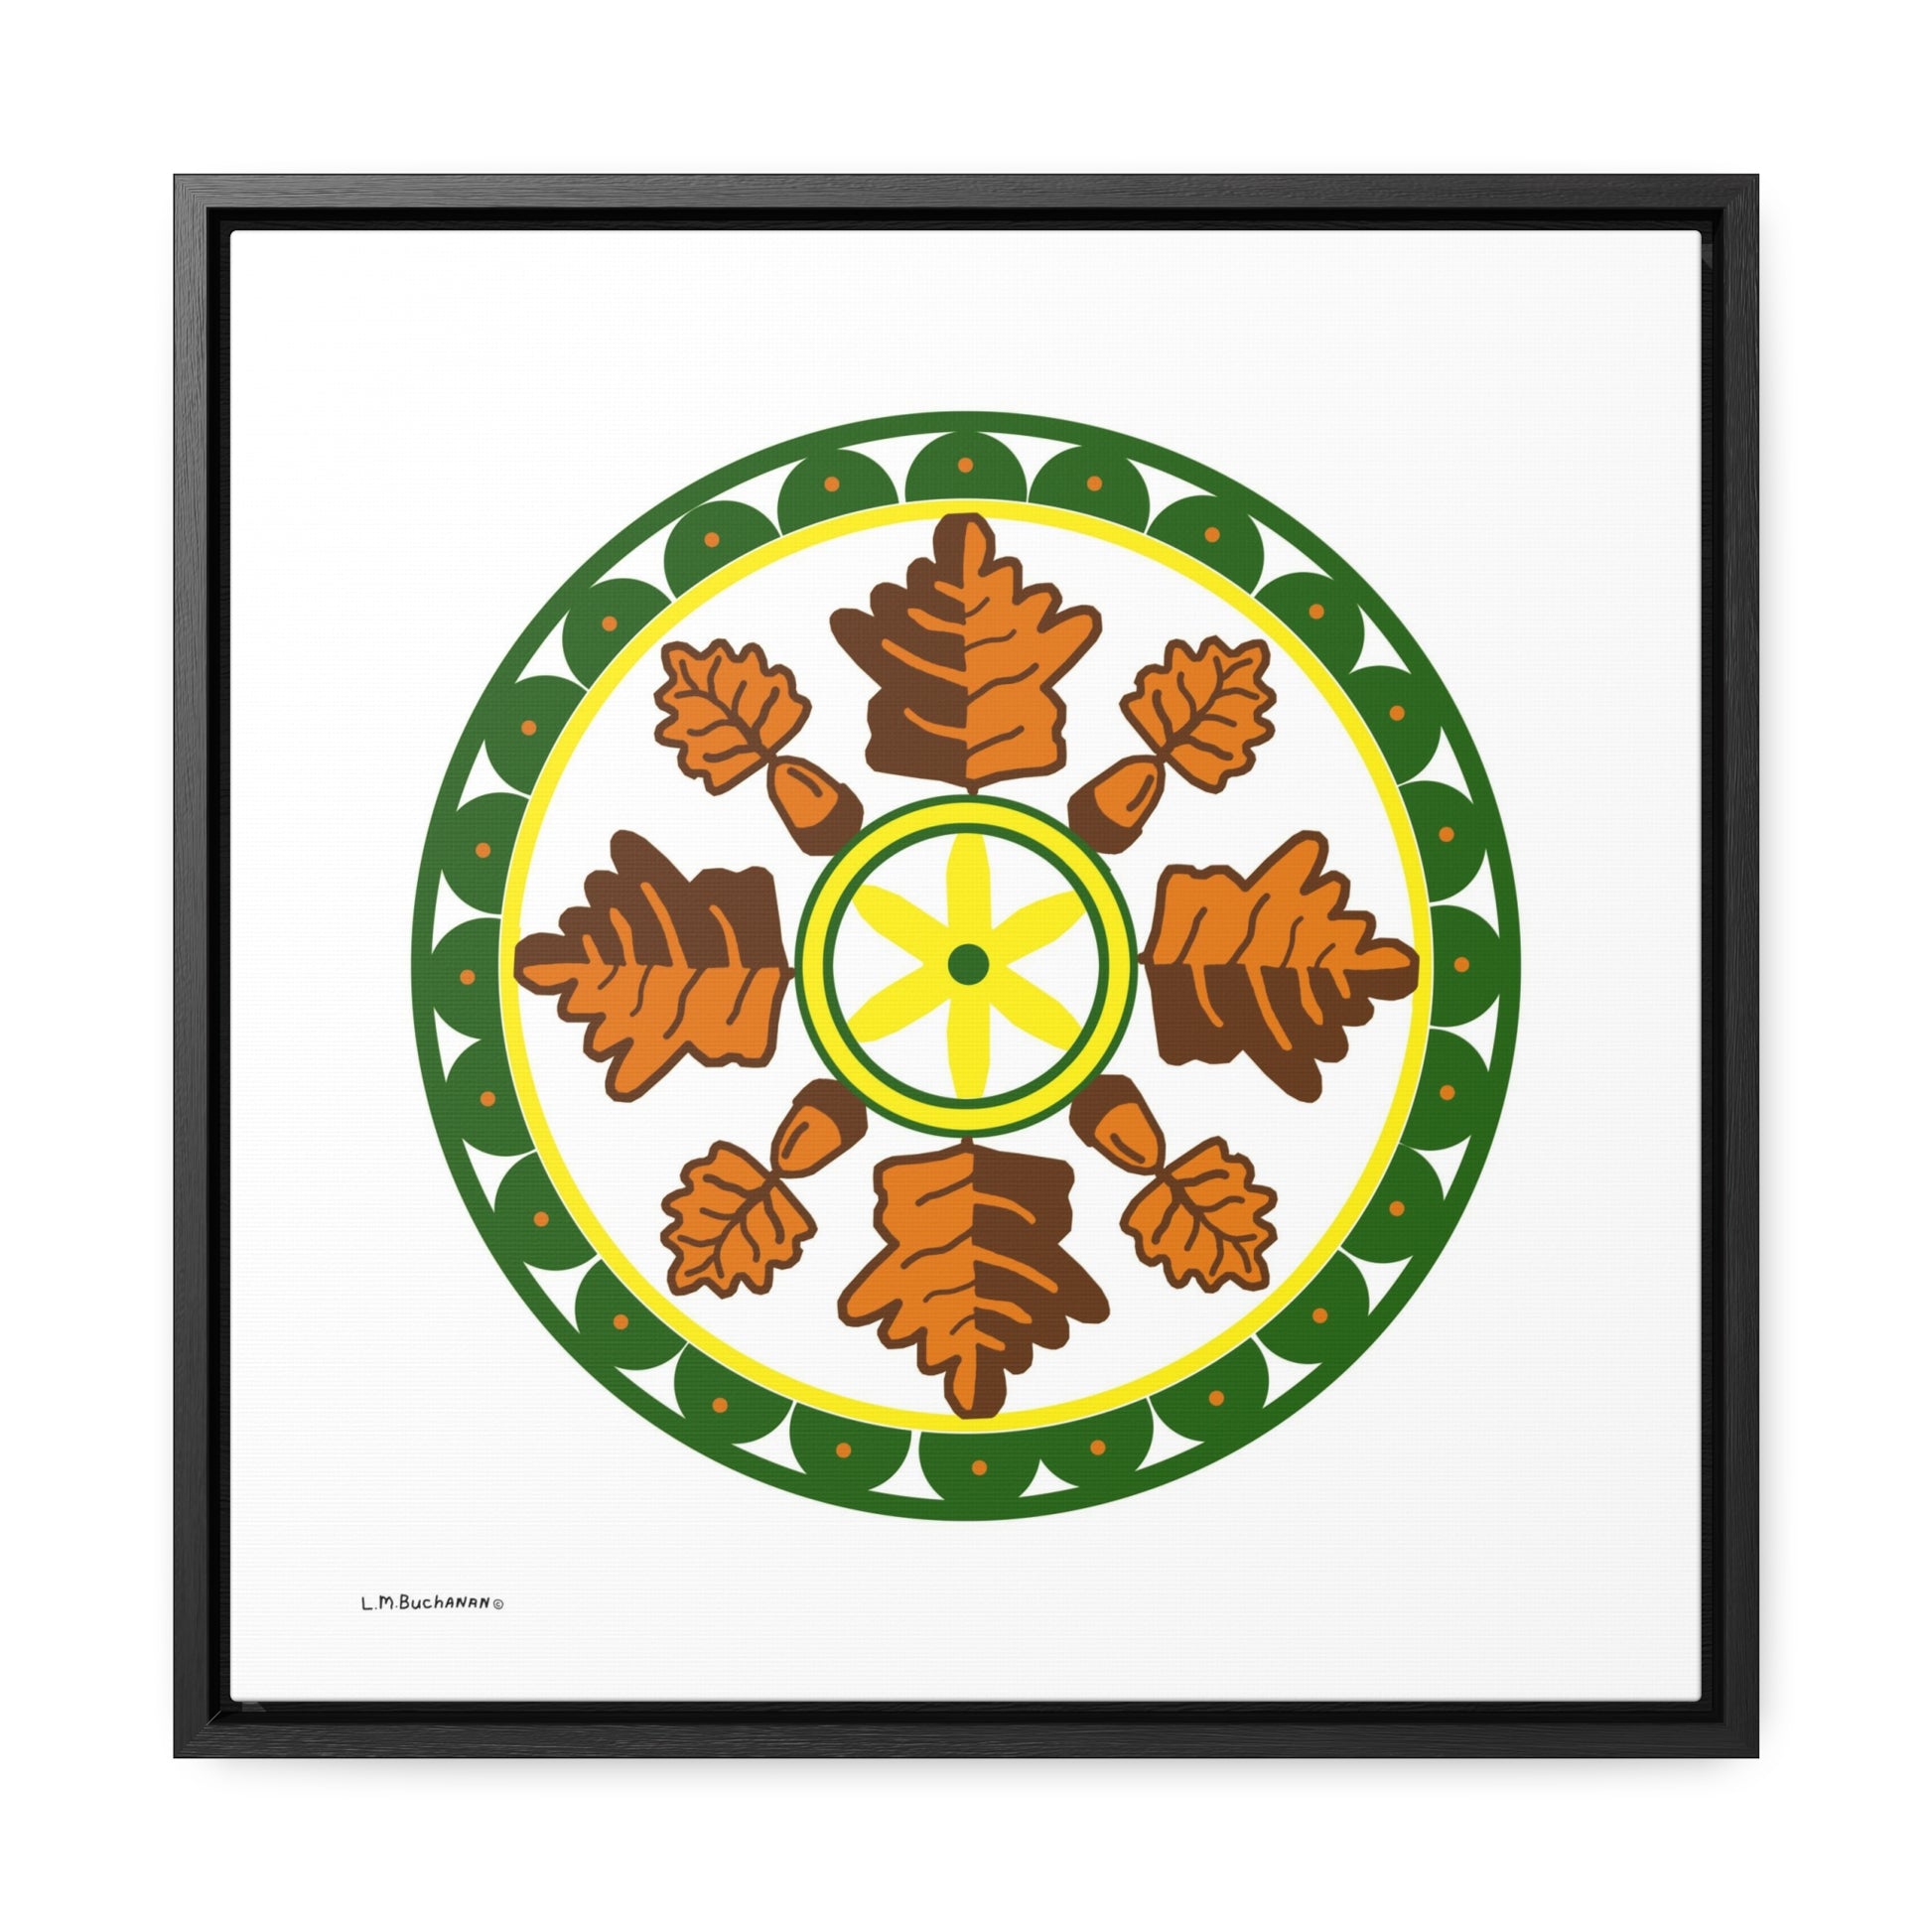 The mighty oak has long been a traditional and favorite Folk Art design for strength, character and long life. Brown represents Mother Earth, yellow emphasizes the sun and man's connection with God, and green represent growth and fertility.  The Oak Leaf Folk Art image is a reproduction of a fine art design by Lee M. Buchanan.